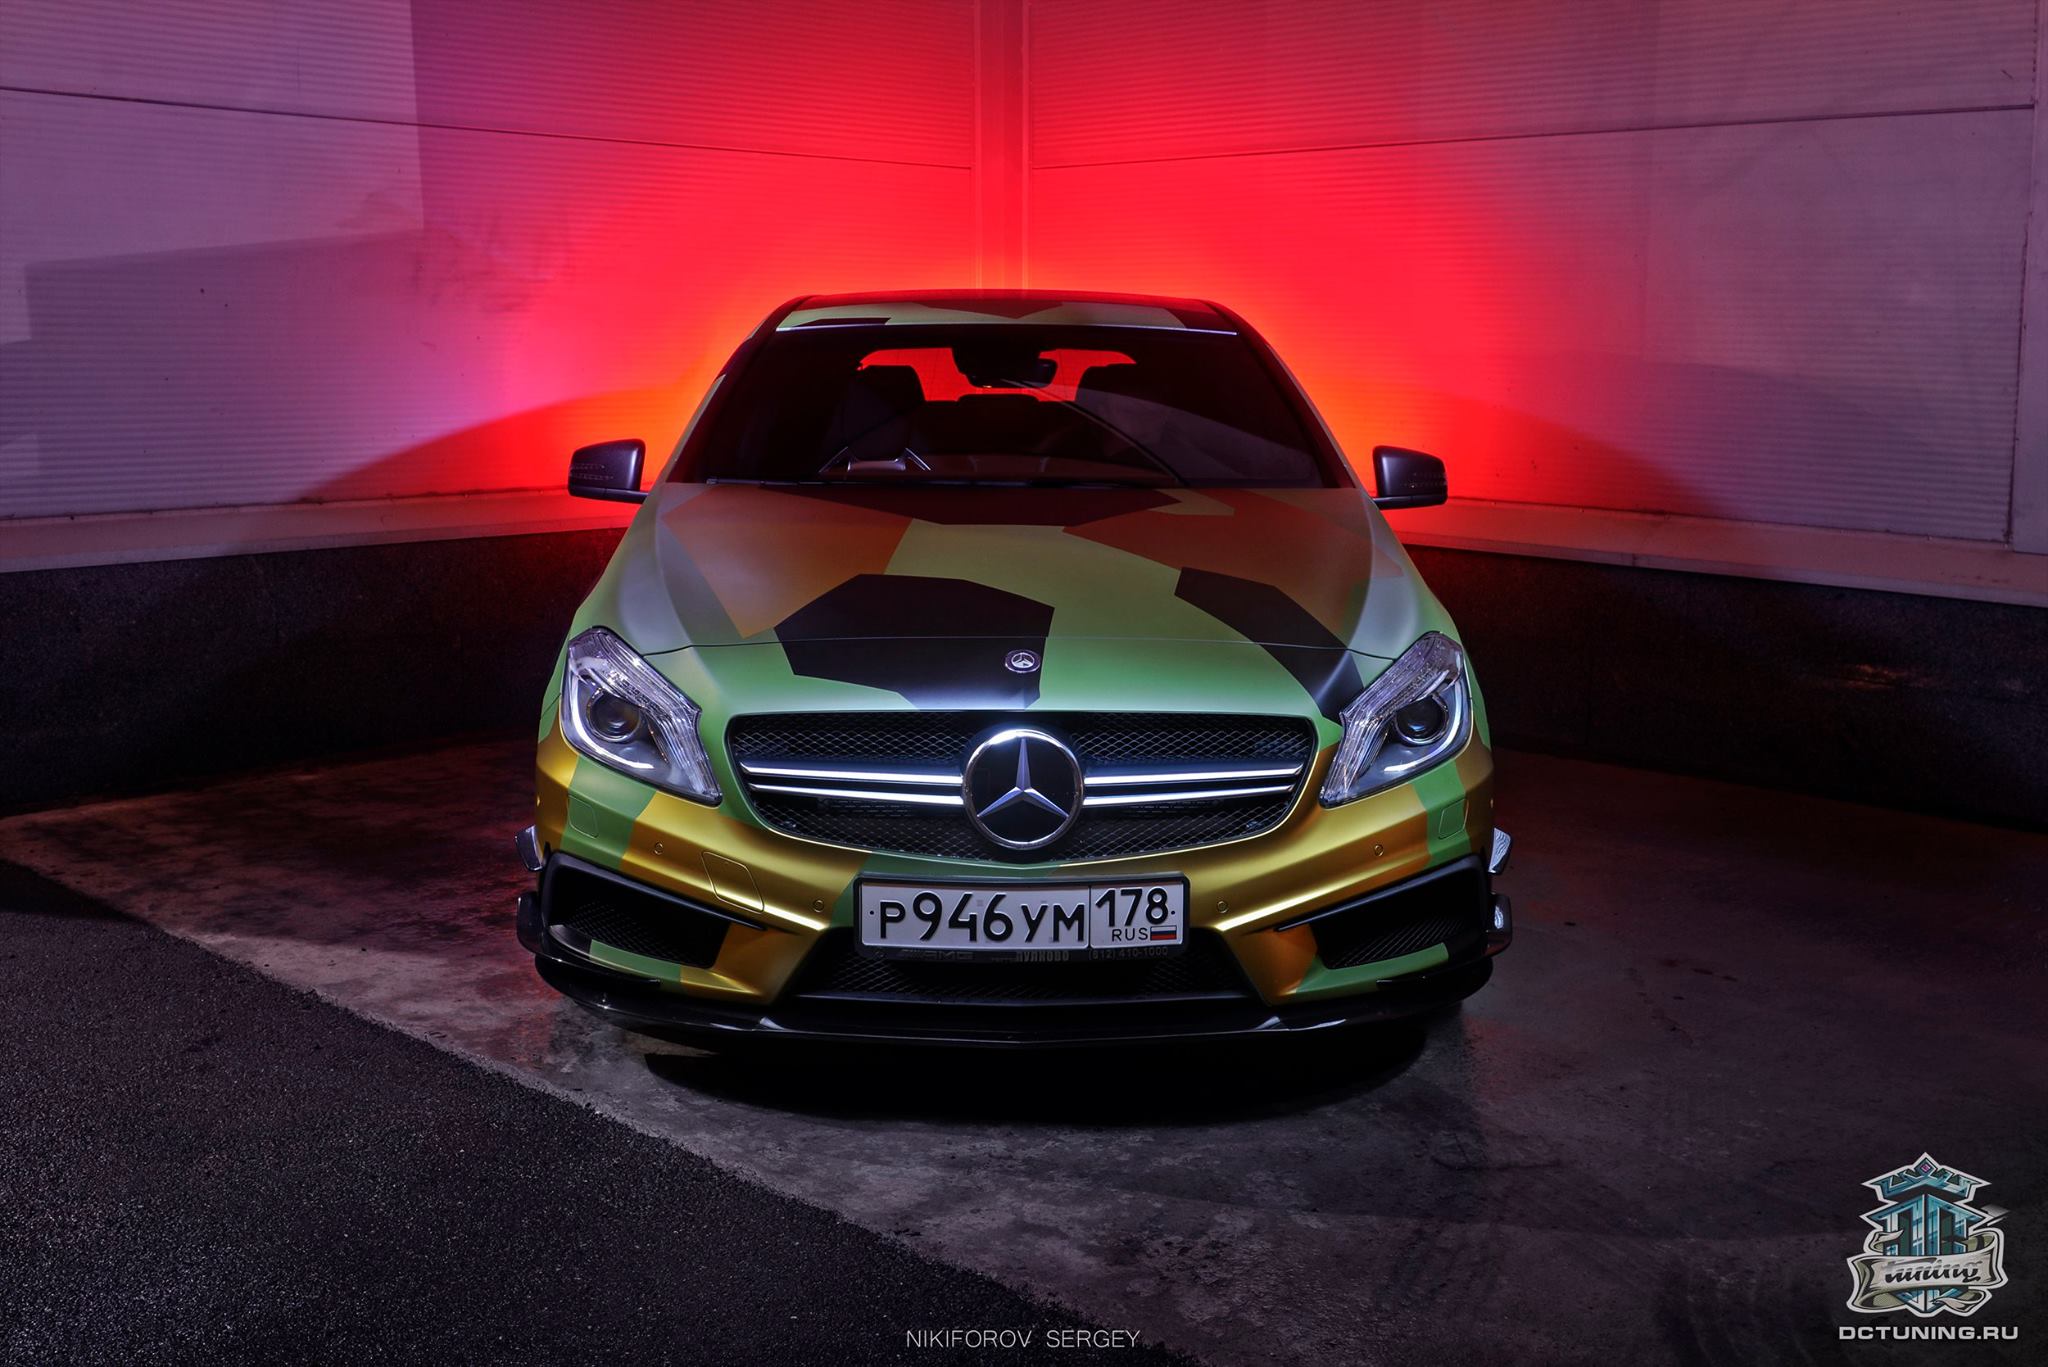 extreem logboek chirurg A45 AMG Gets City Camouflage Wrap from DC Tuning Russia - autoevolution